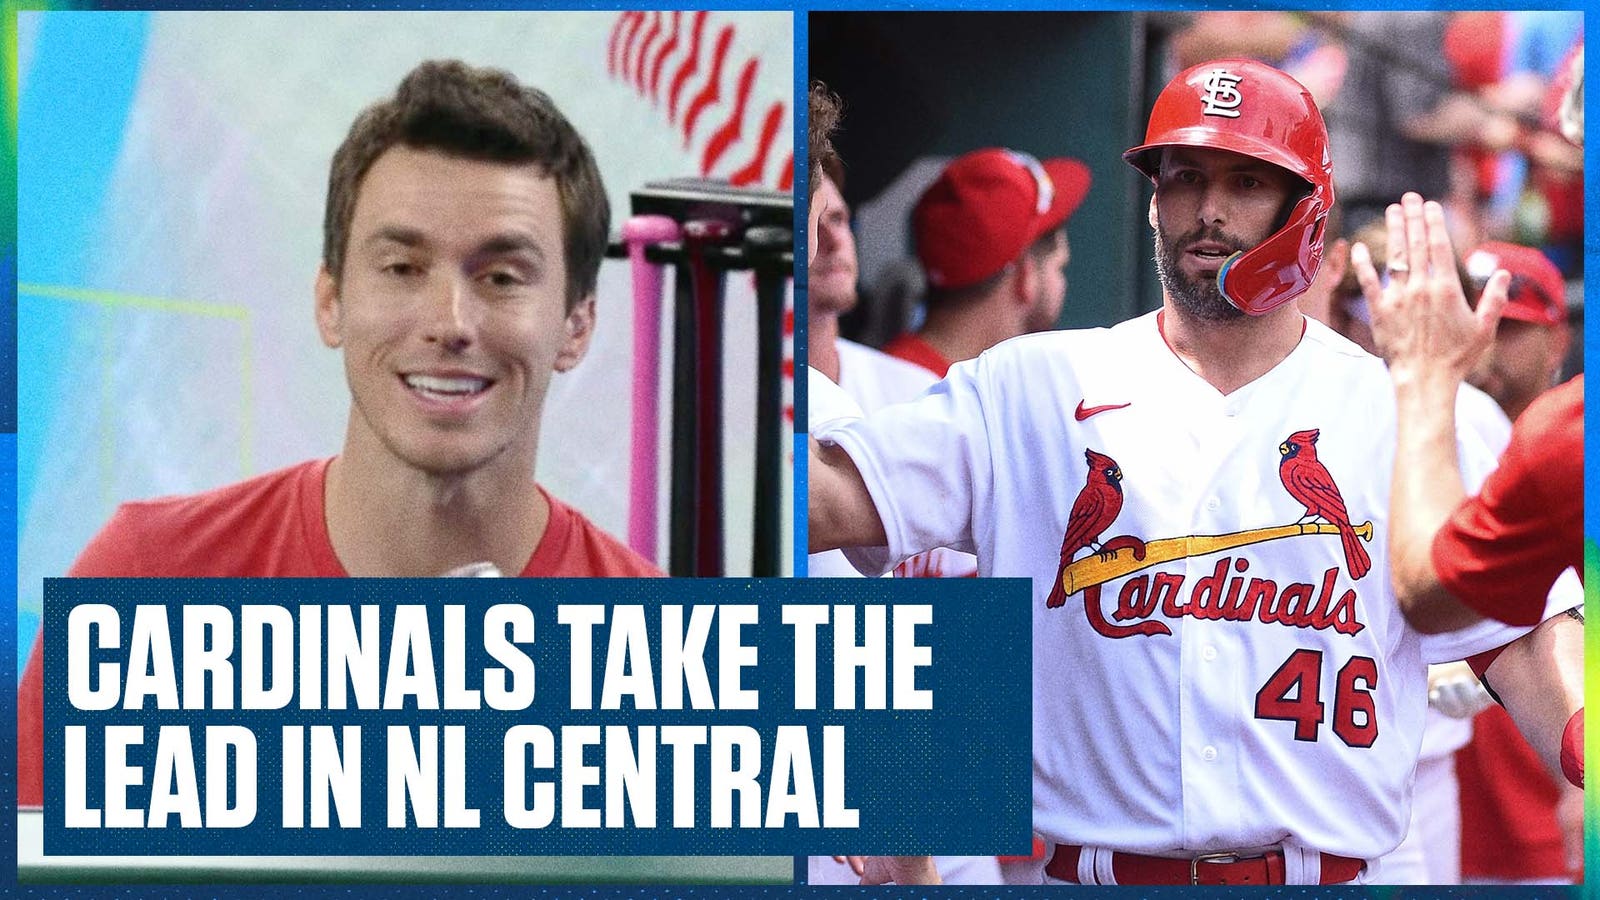 Cardinals will win the NL Central as Brewers continue to decline